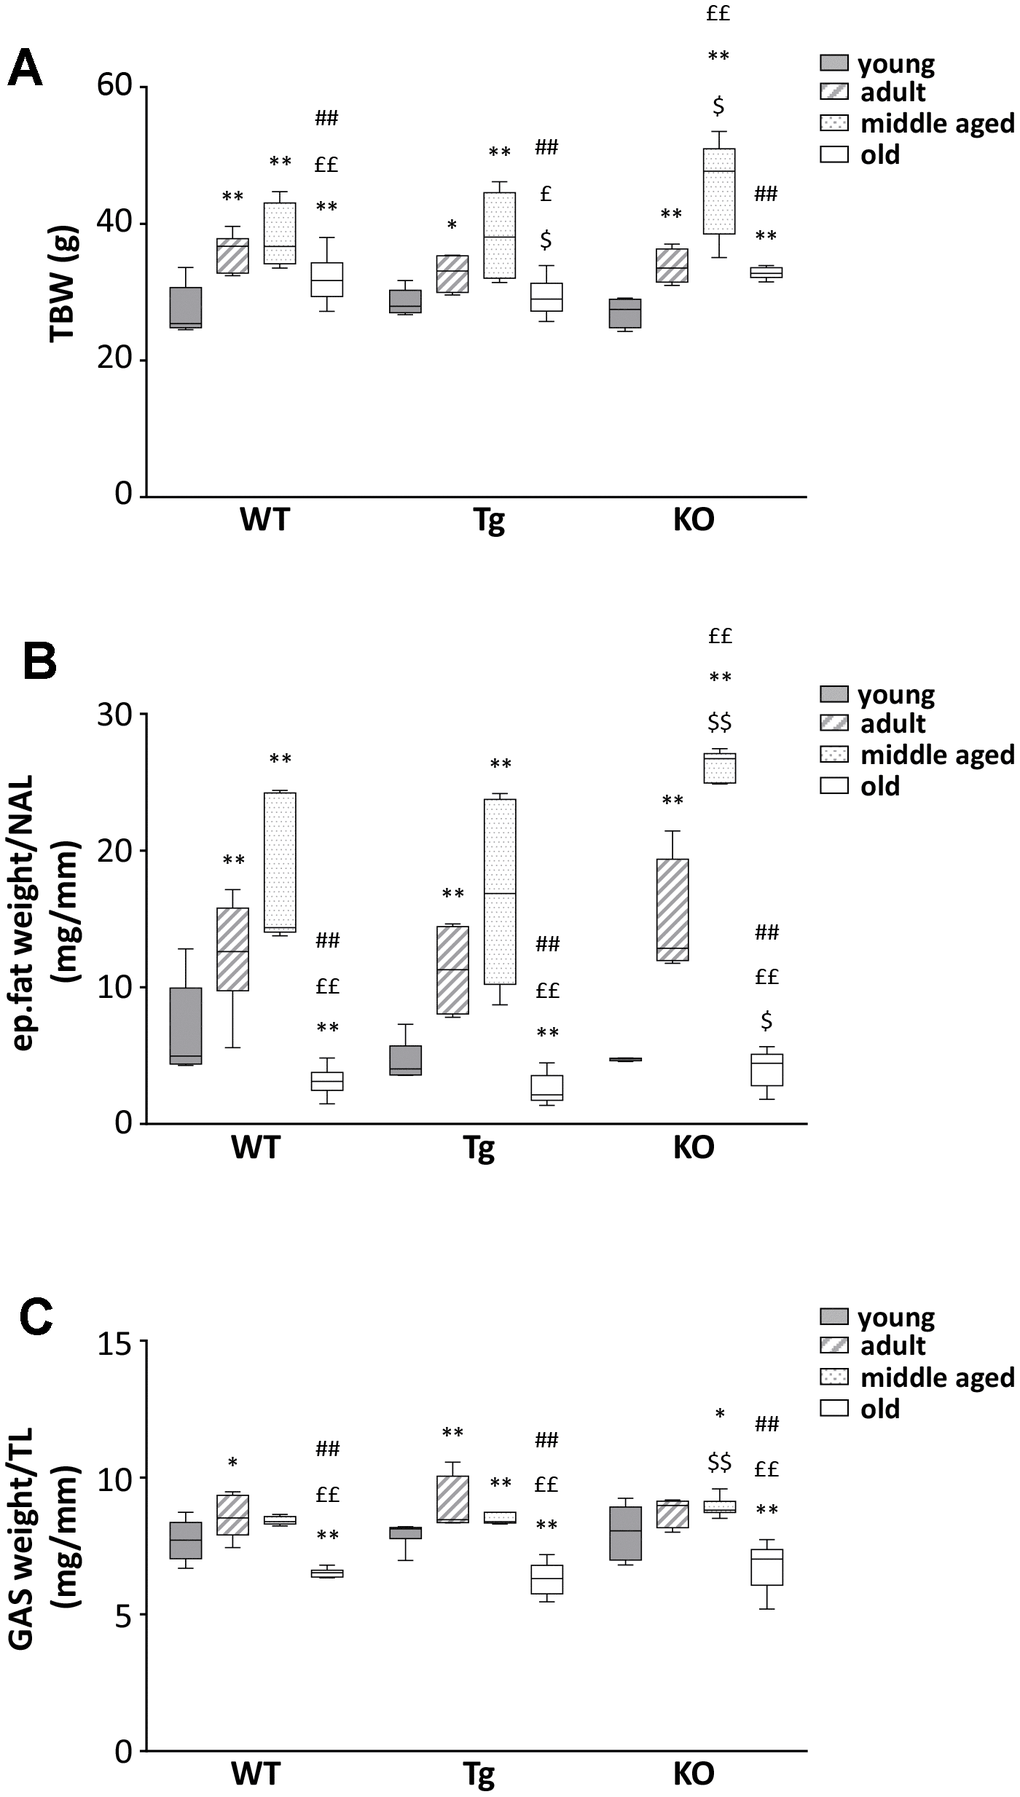 Body mass composition in young and old WT, Tg, and Ghrl KO mice. (A) Total body weight in 3-month old (young), 6-month old (adult), 12-month old (middle aged), and 24-month old (old) mice. (B) Epidydimal fat mass normalized to nose-to-anus length (NAL) and (C) gastrocnemius weight normalized to the tibial length (TL). Young mice: WT = 6, Tg = 7, Ghrl KO = 5; adult mice: WT = 7, Tg = 4, Ghrl KO = 5; middle aged: WT = 5, Tg = 6, Ghrl KO = 9; old mice: WT= 13, Tg= 14, Ghrl KO = 11. Data in bar graphs are presented as mean ± SEM. For each box plot, the lower and up boundaries denote the 25th and the 75th percentile of each data set, respectively, the horizontal line represents the median, and the whiskers represent the min and max of values. *p£p££p#p##p$p$$pGhrl KO vs. WT.